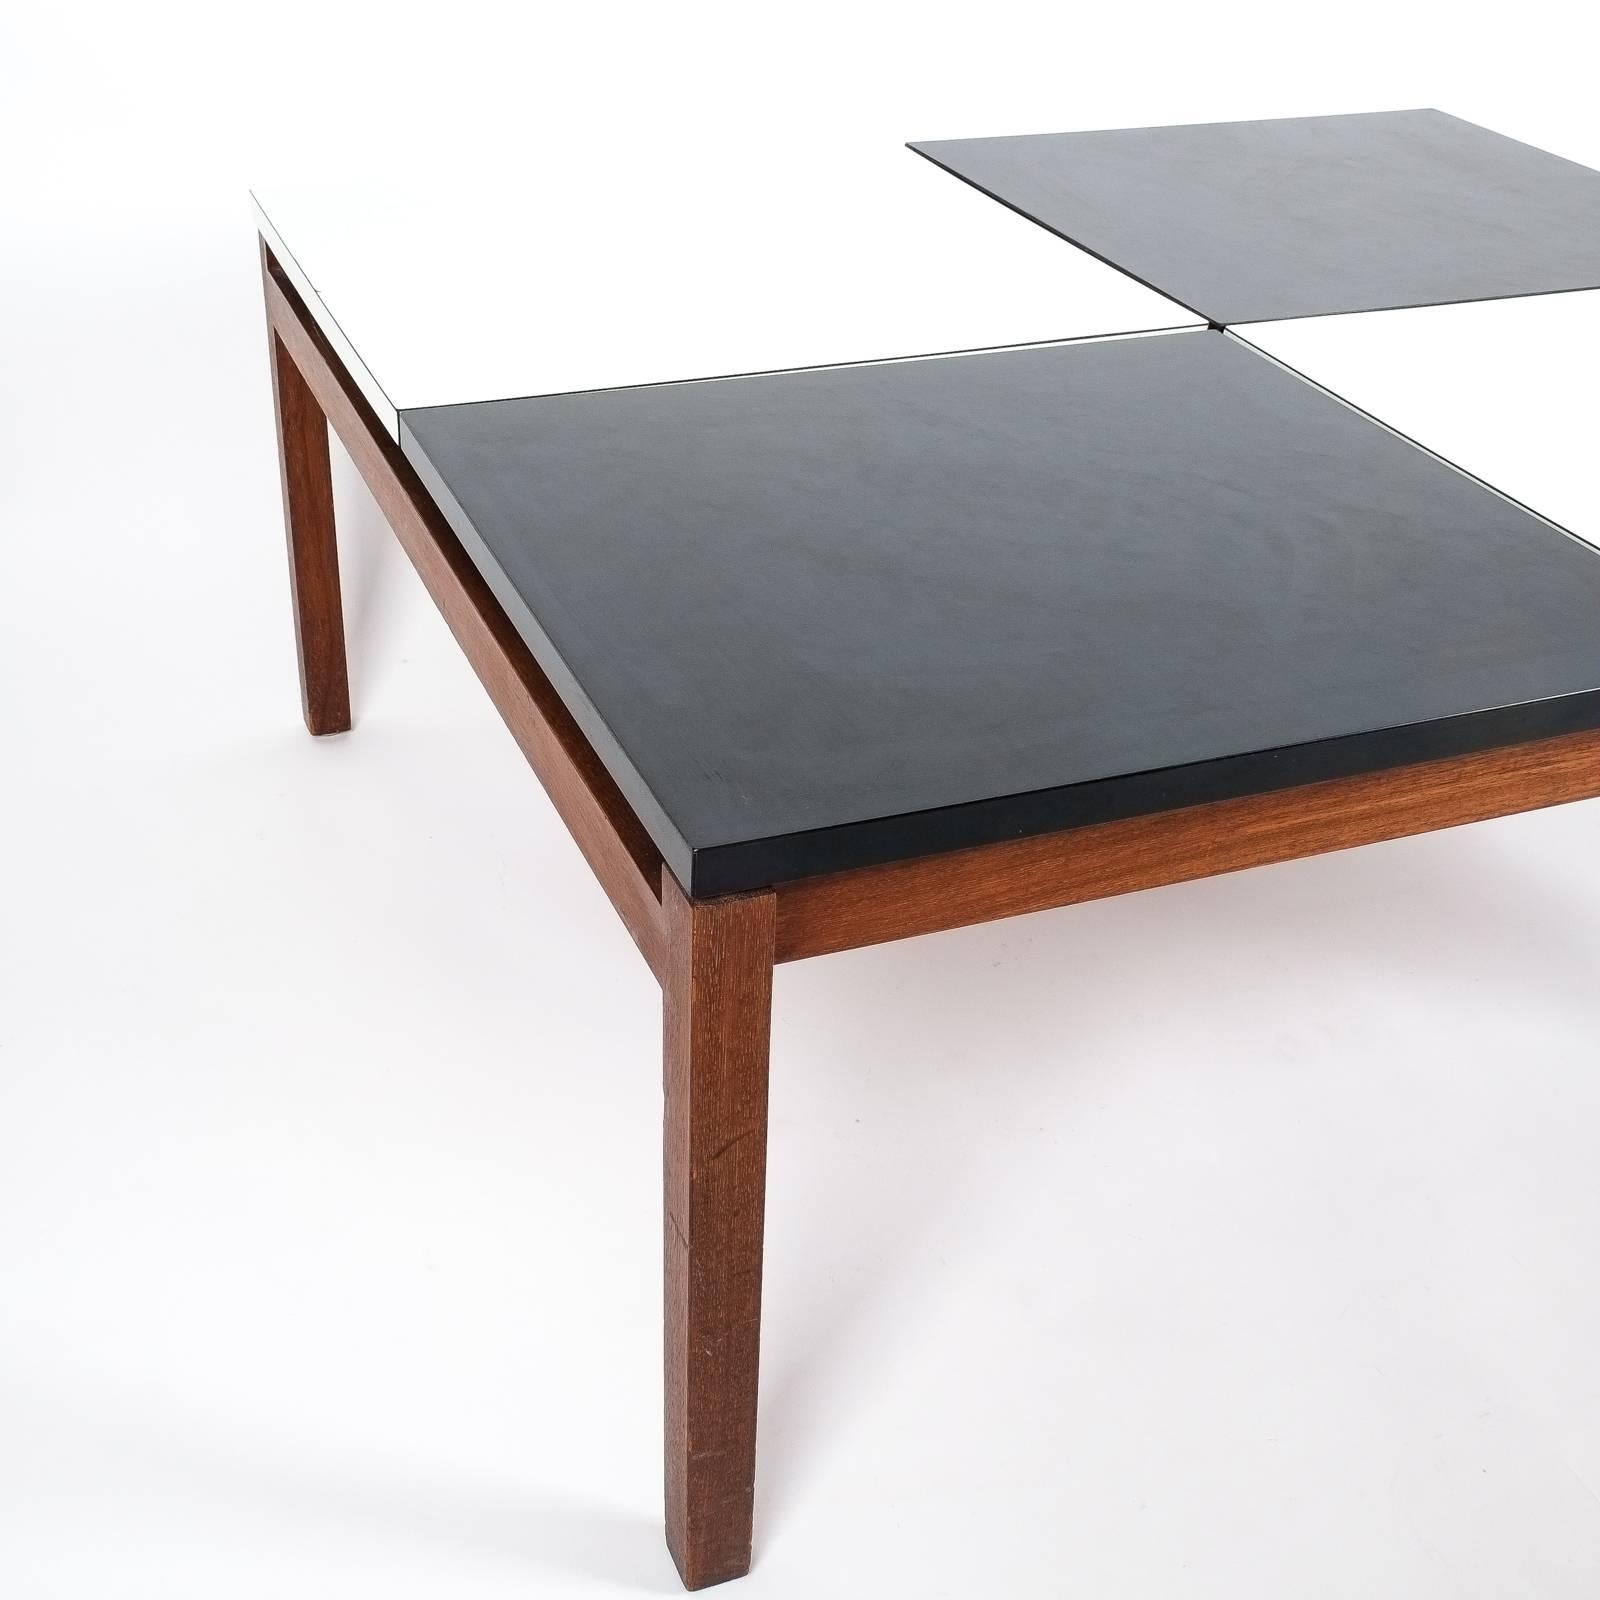 Laminate Lewis Butler Black and White Coffee Table Walnut Wood Base, Knoll, 1960 For Sale